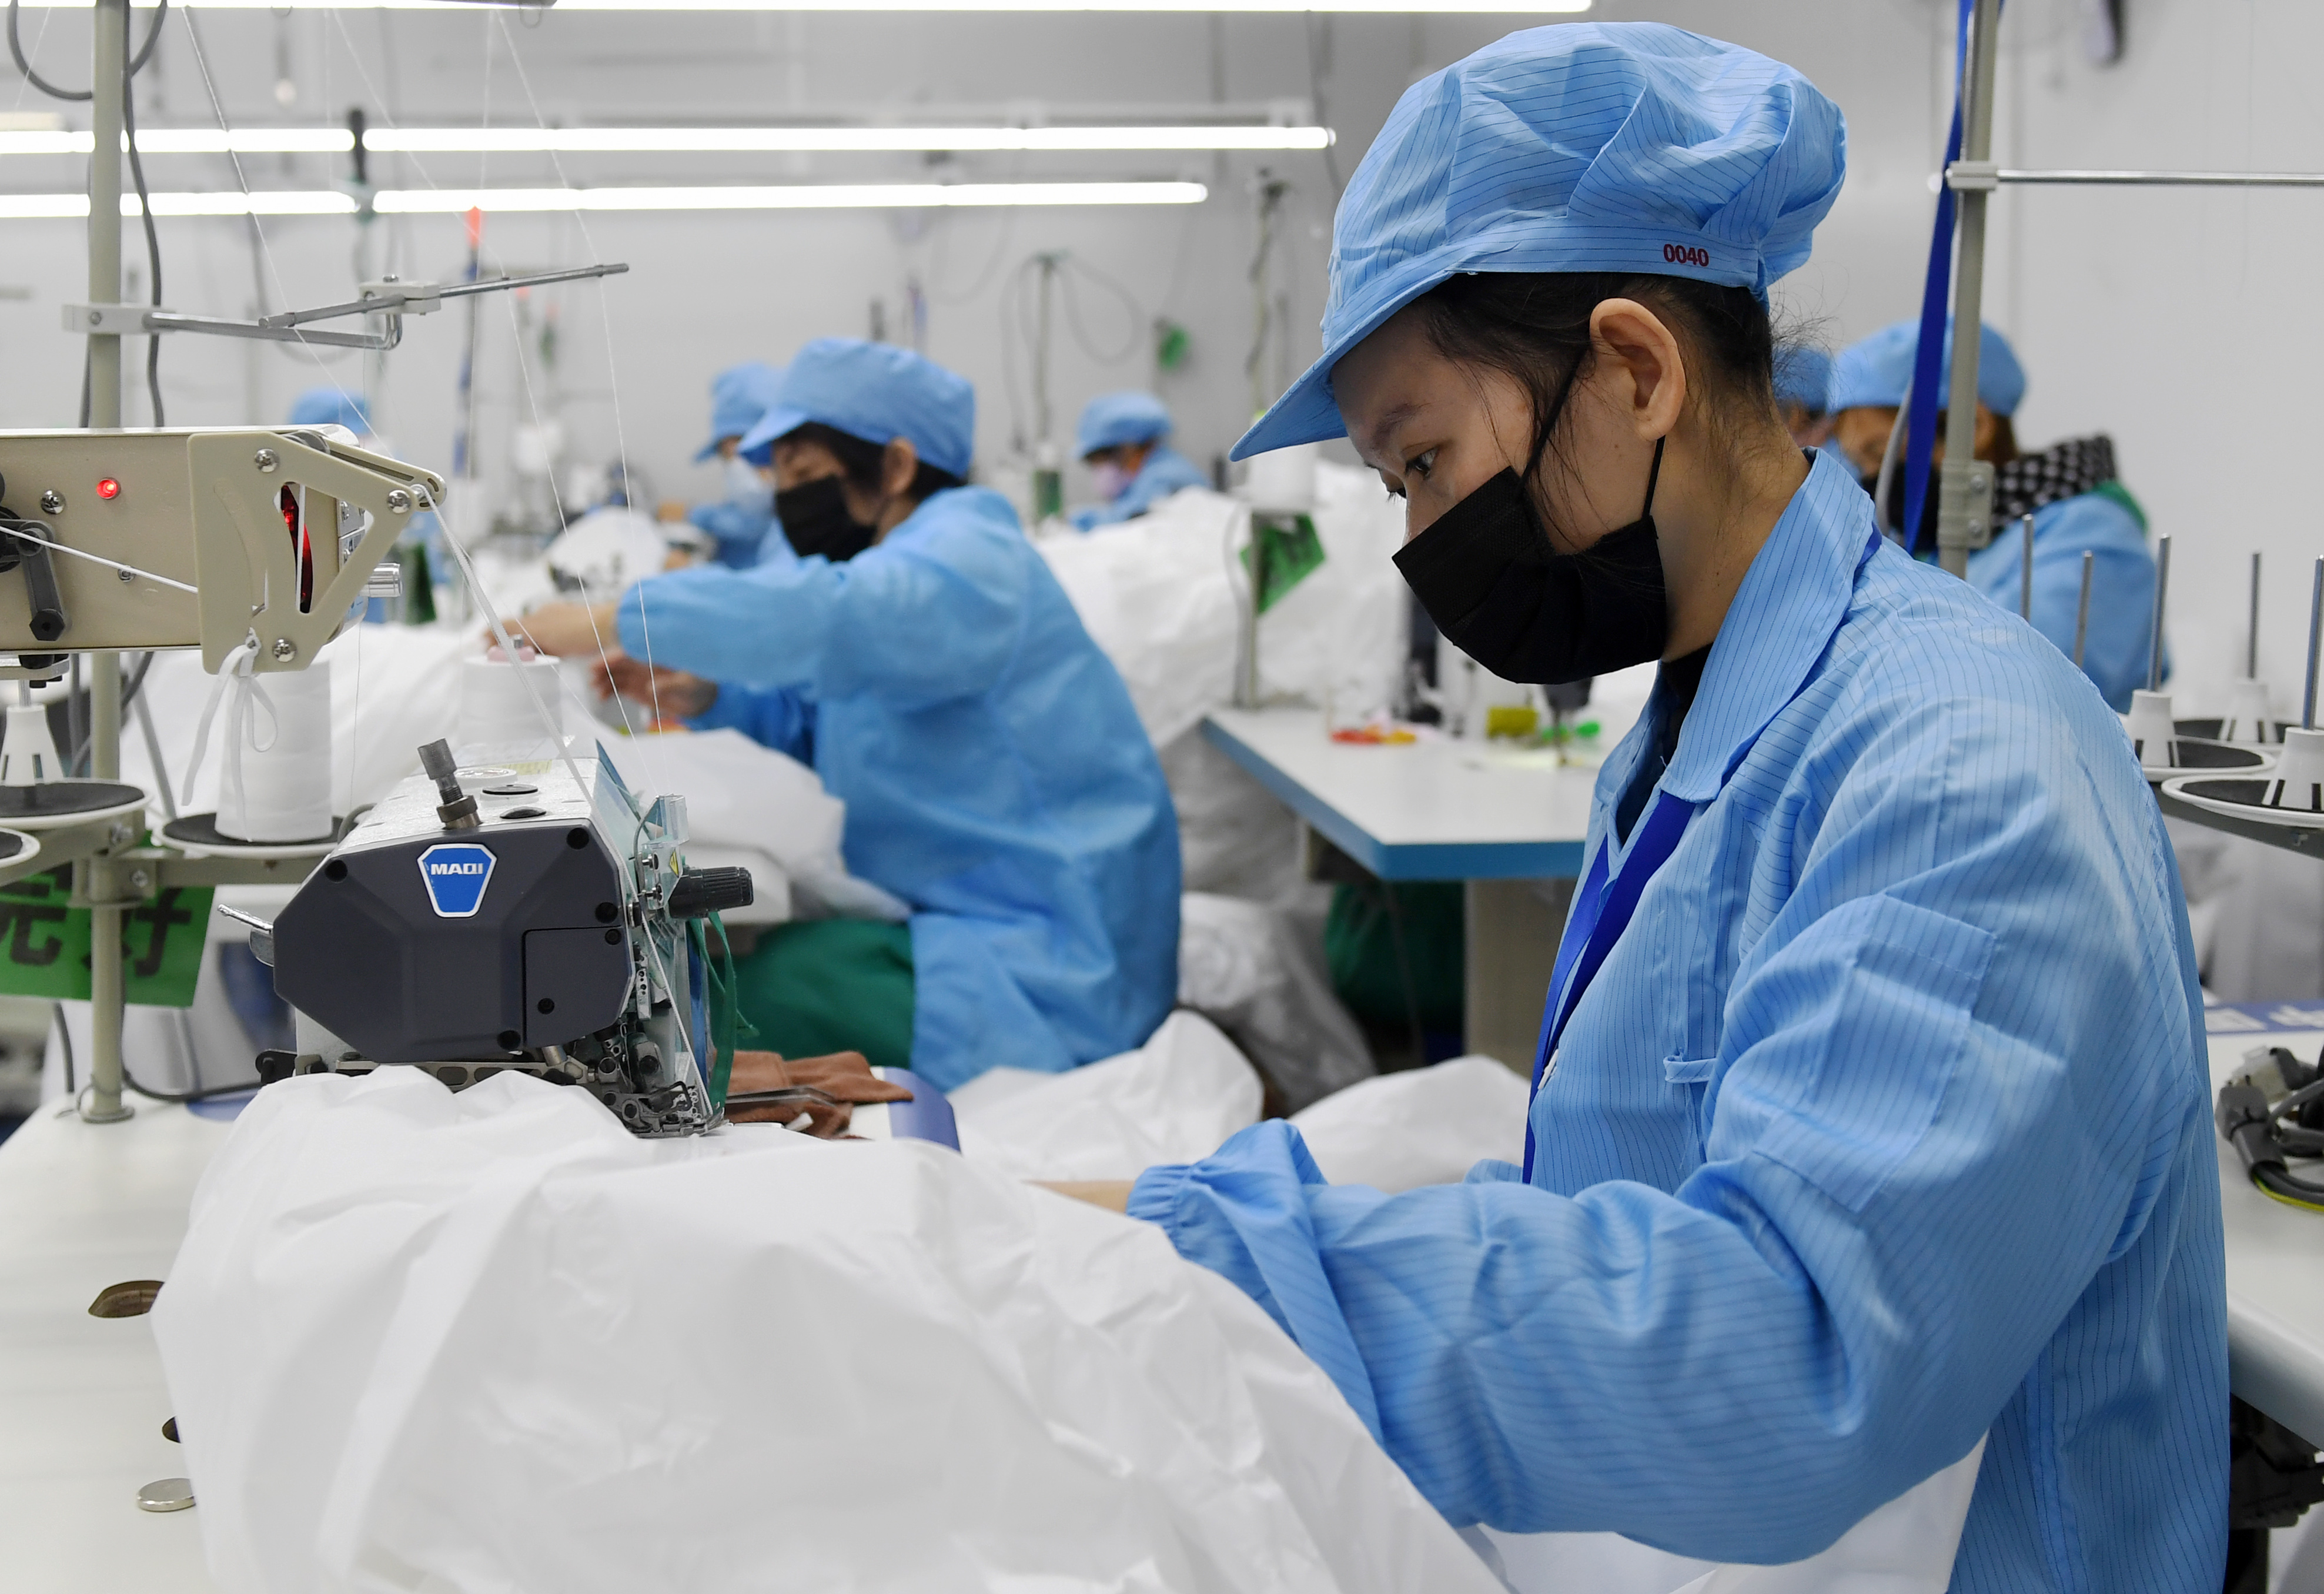 Workers make medical isolation gowns at a biotechnology company in Nanning, south China